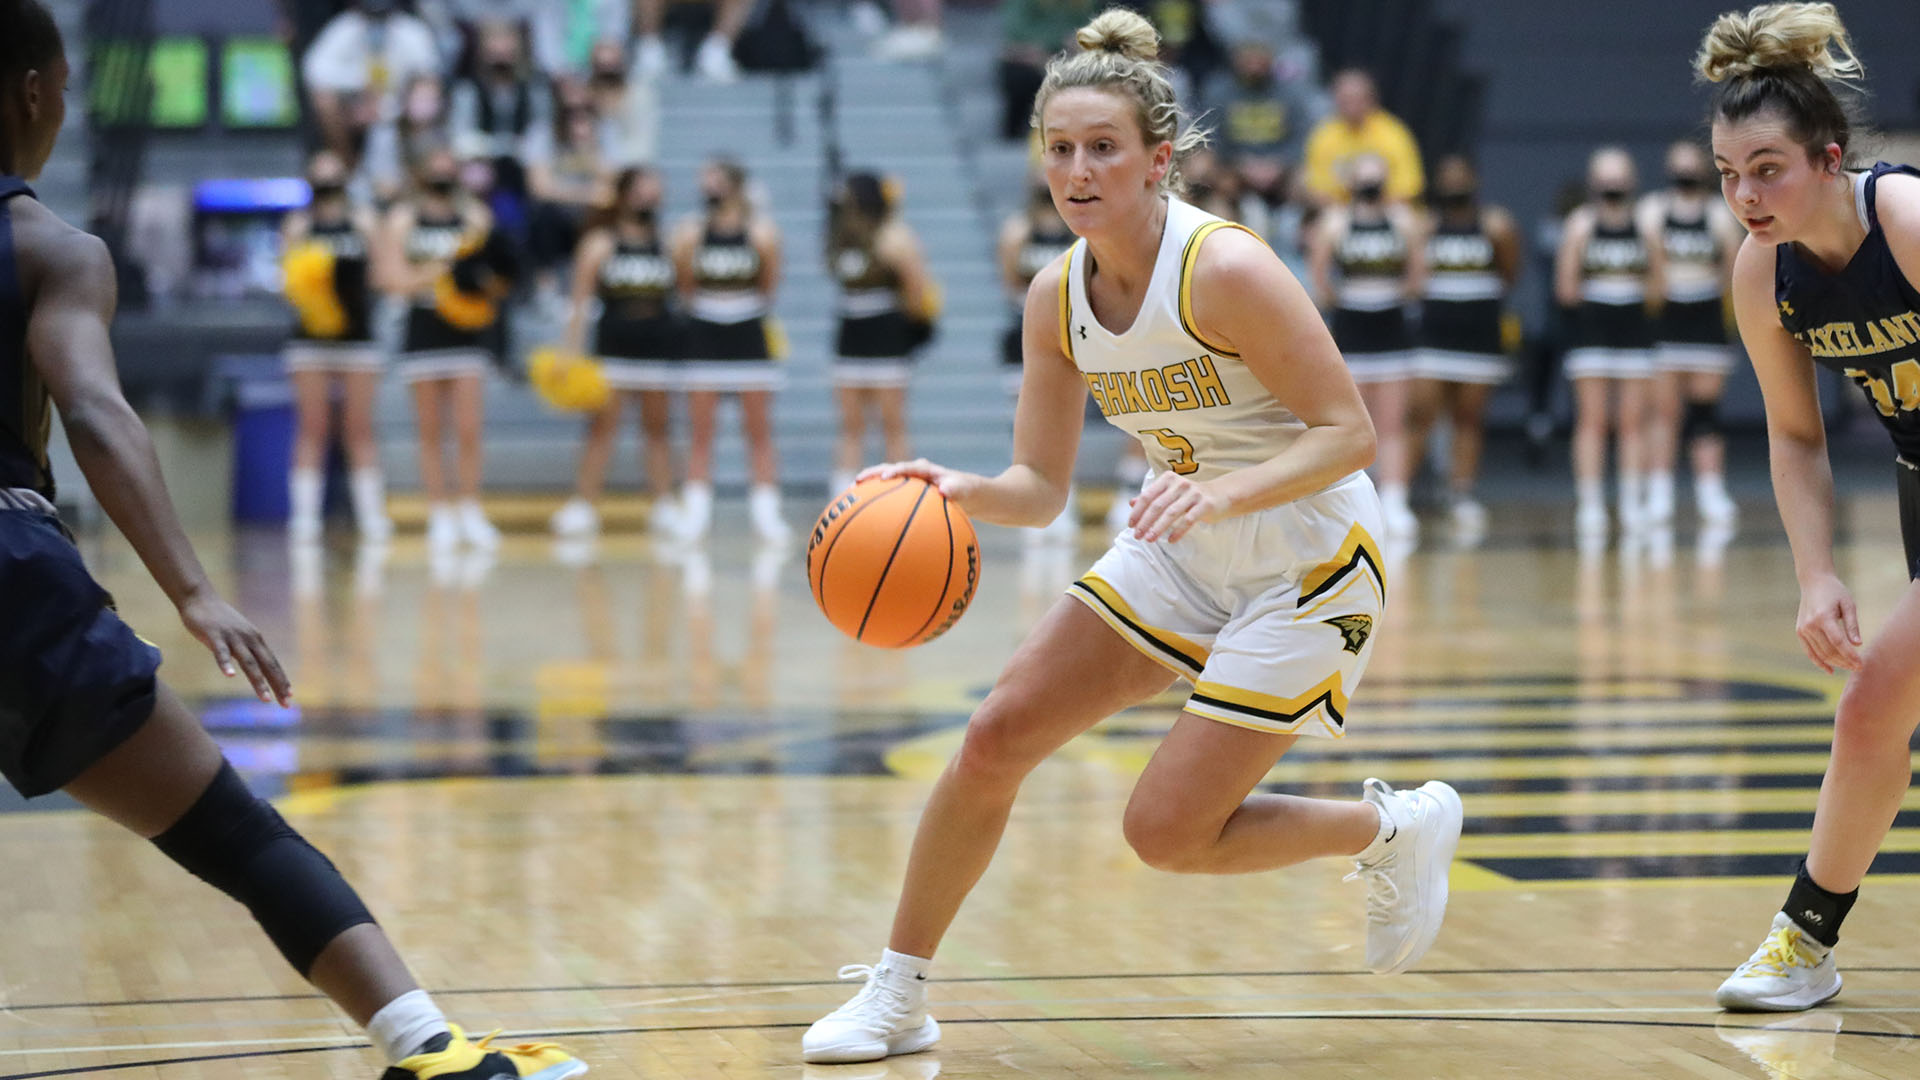 Ava Douglas scored a career-high tying 10 points against the Eagles.